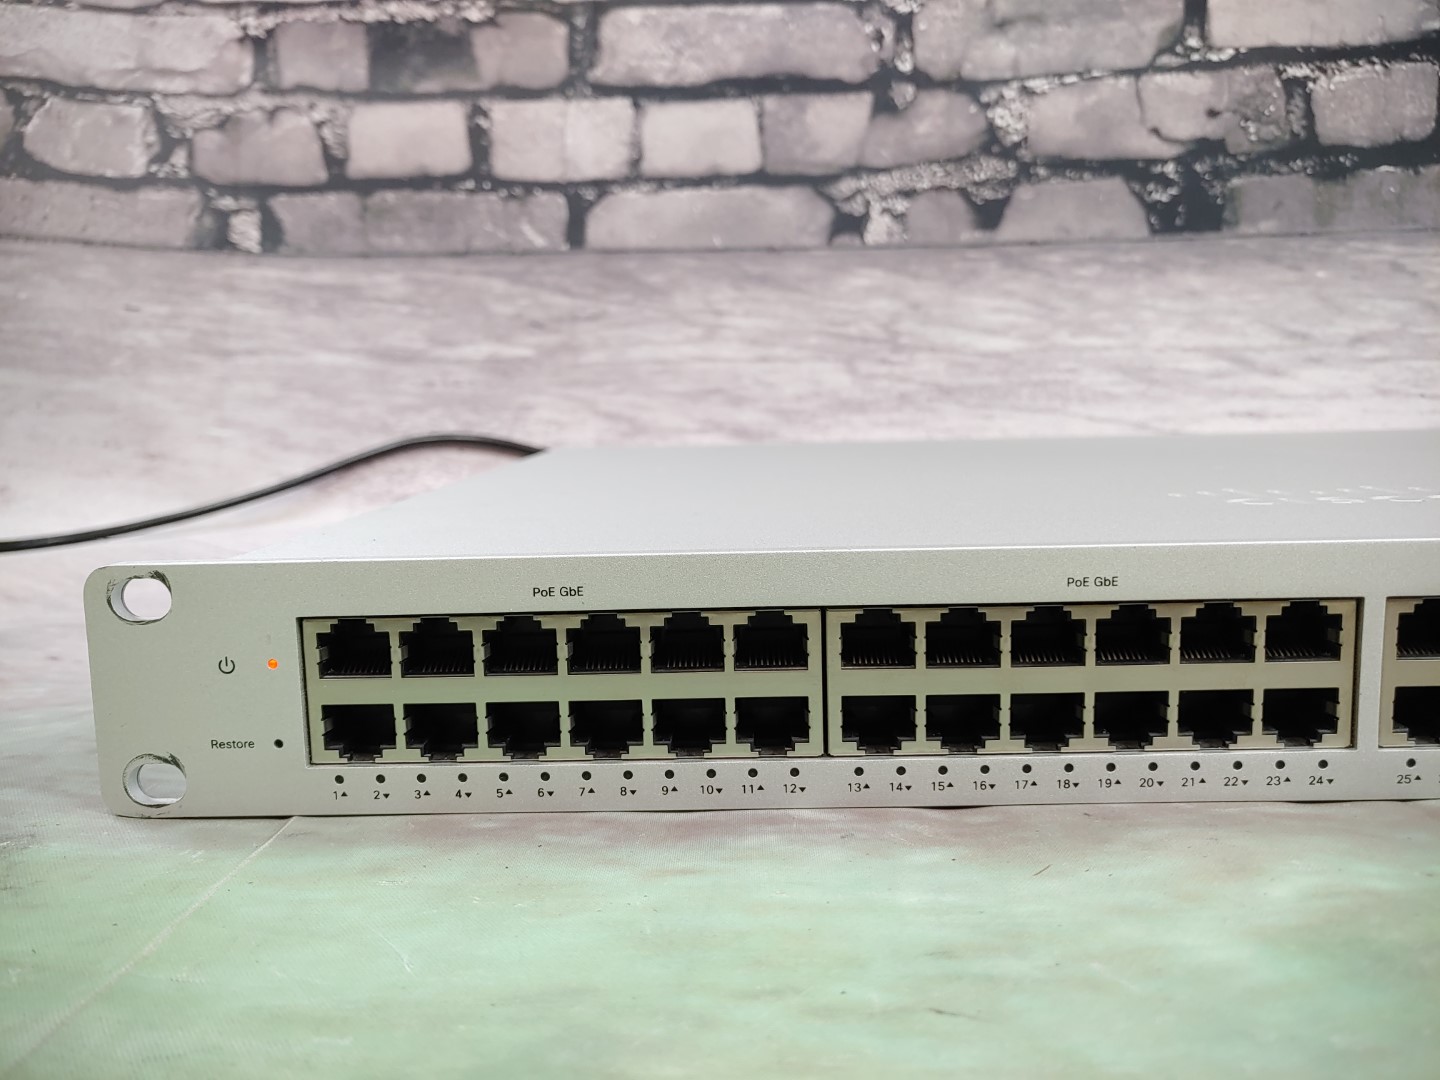 Tested and Pulled from a working environment. May have minor scratches/scuffs from normal use. **NO POWER CORD INCLUDED** Item Specifics: MPN : MS220-48LP-HWUPC : N/AType : Ethernet SwitchForm Factor : Rack-MountableBrand : Cisco MerakiModel : MS220-48LP-HWNetwork Management Type : Fully Managed Number of LAN Ports : 48 - 1